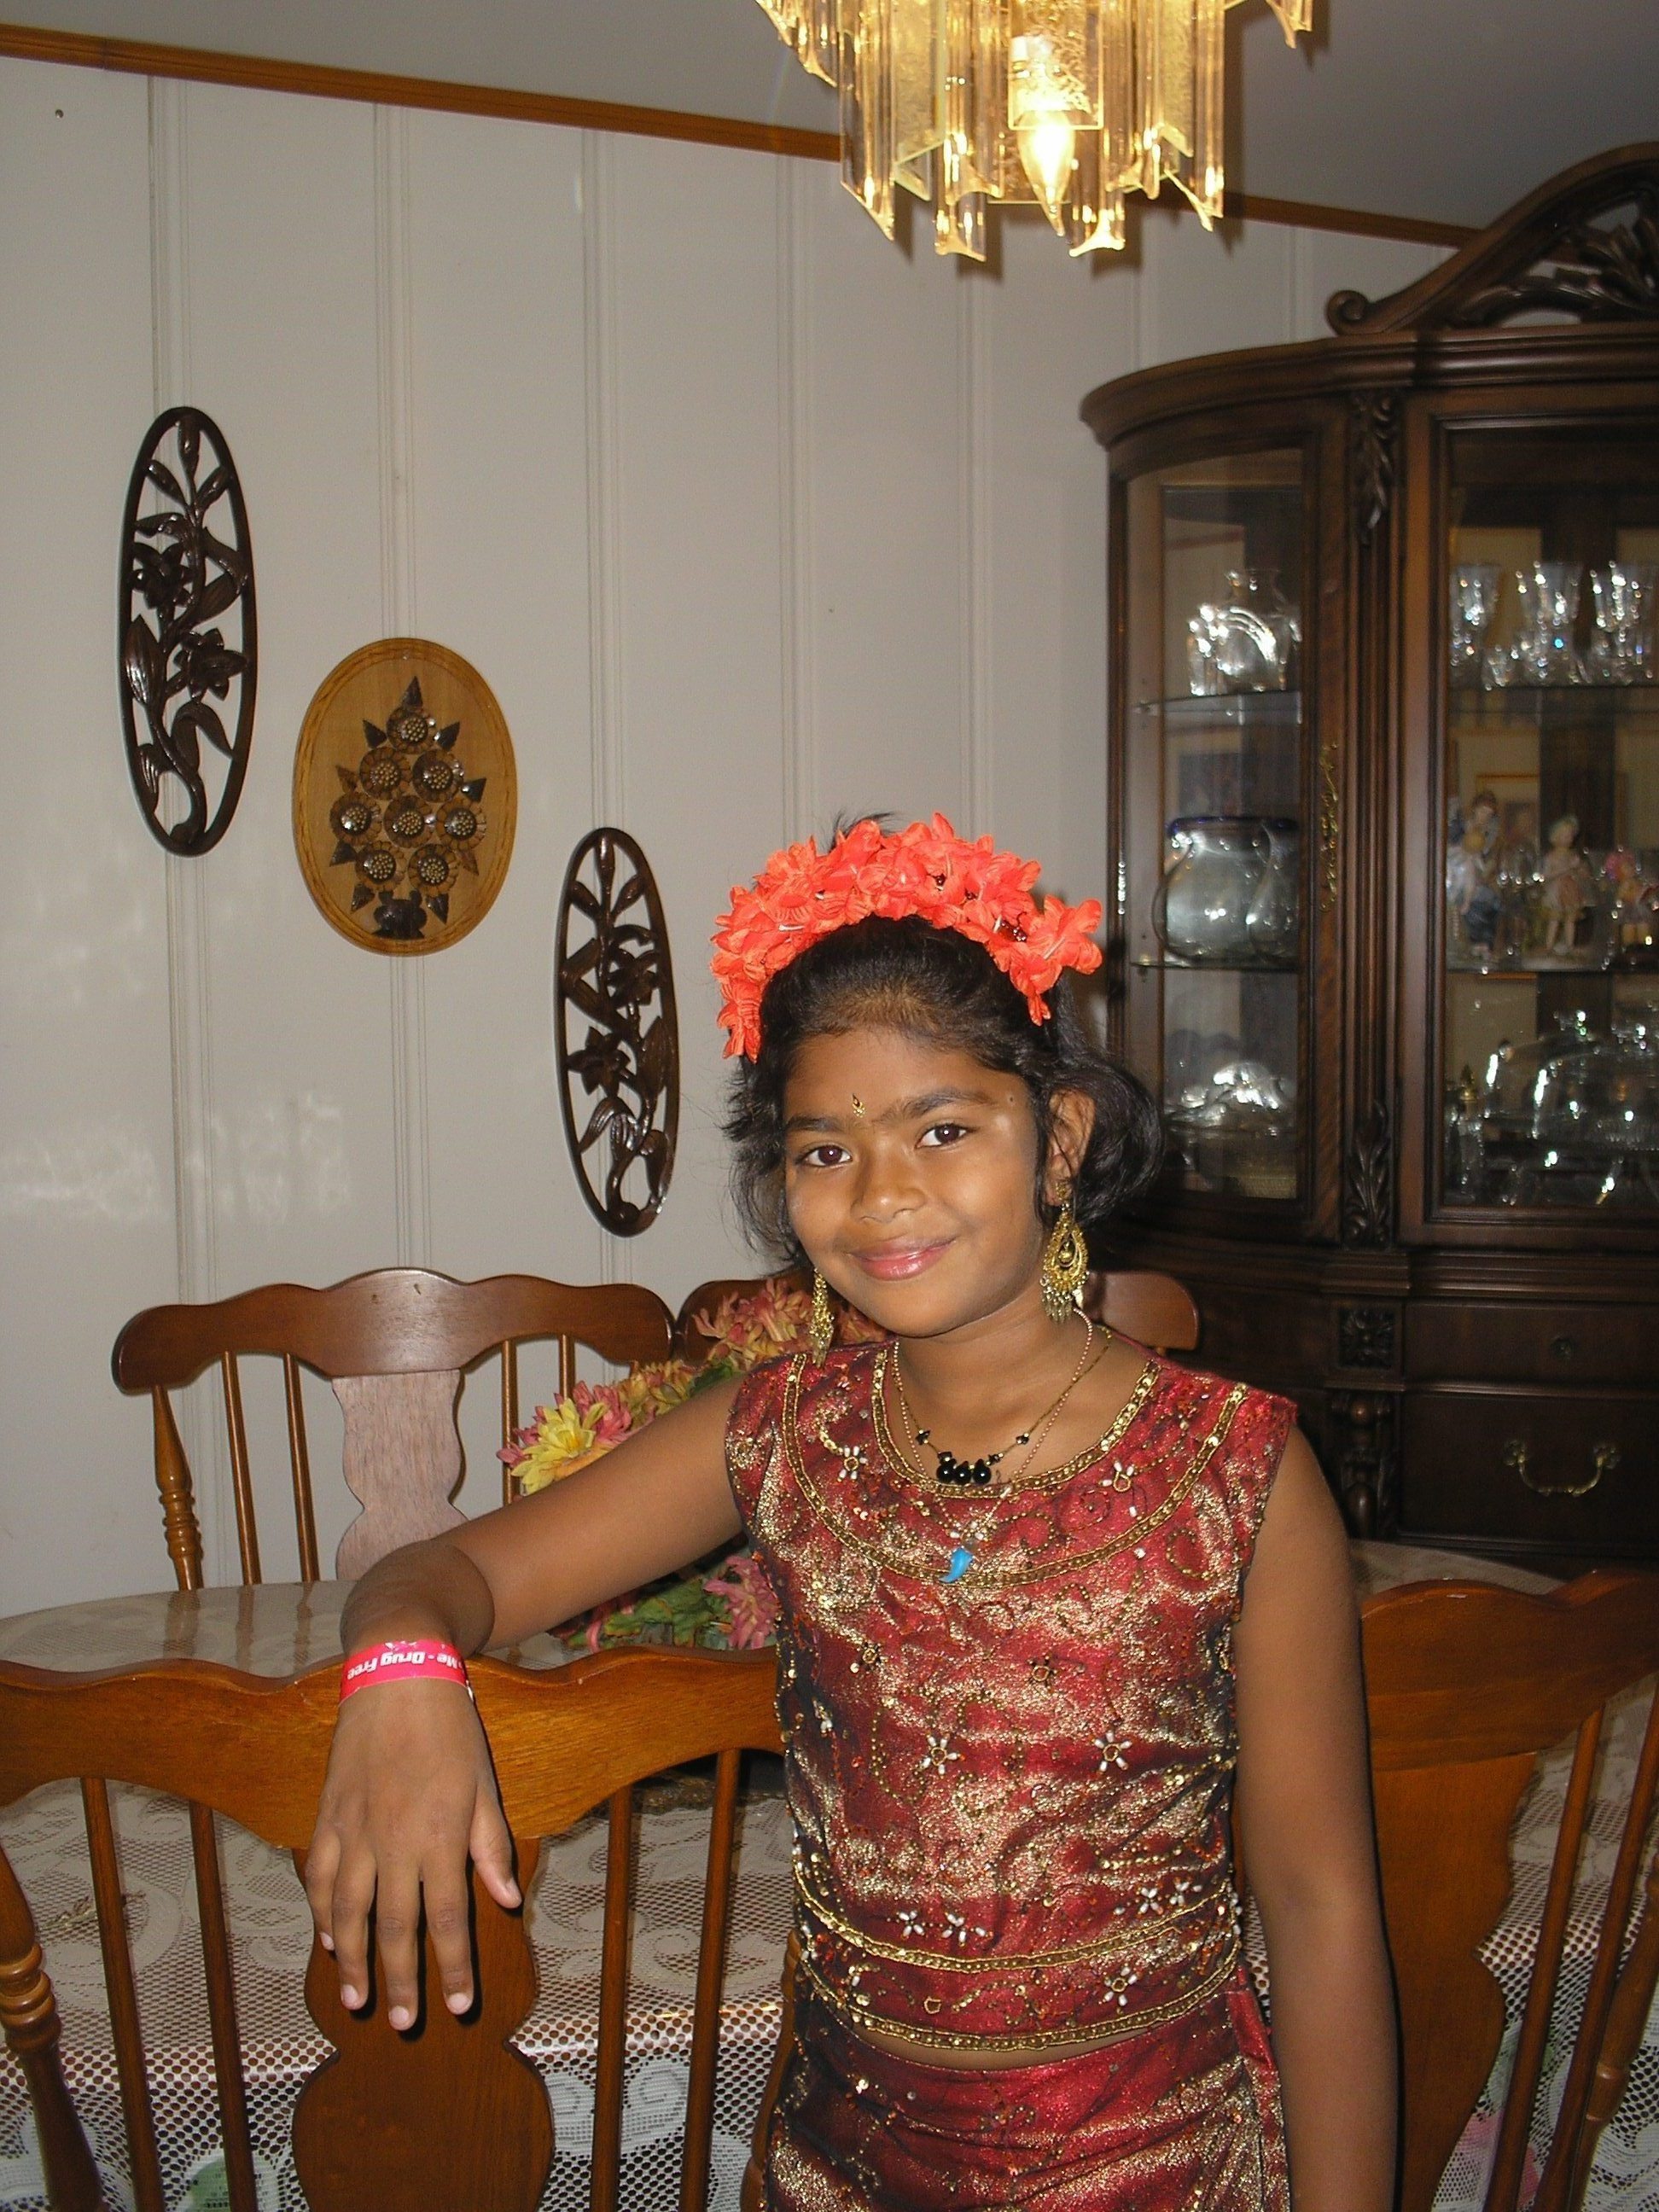 Desiree S. Gabriel, originally from Sri Lanka, was adopted into a family from San Antonio at the age of six.